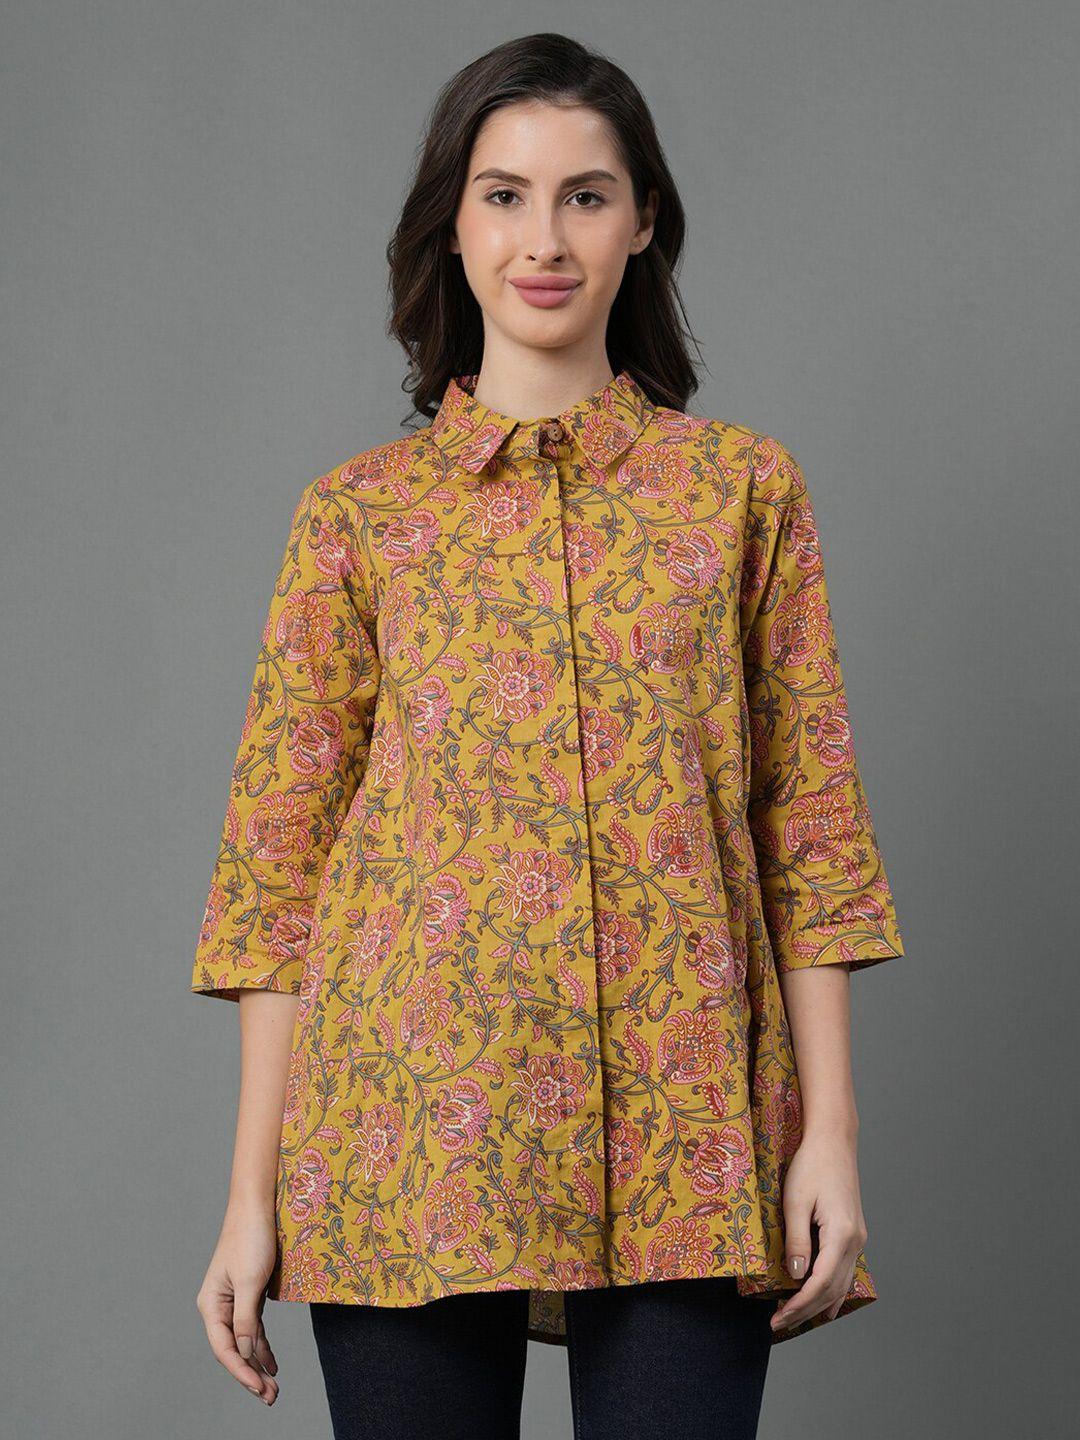 mode by red tape floral printed pure cotton shirt style top